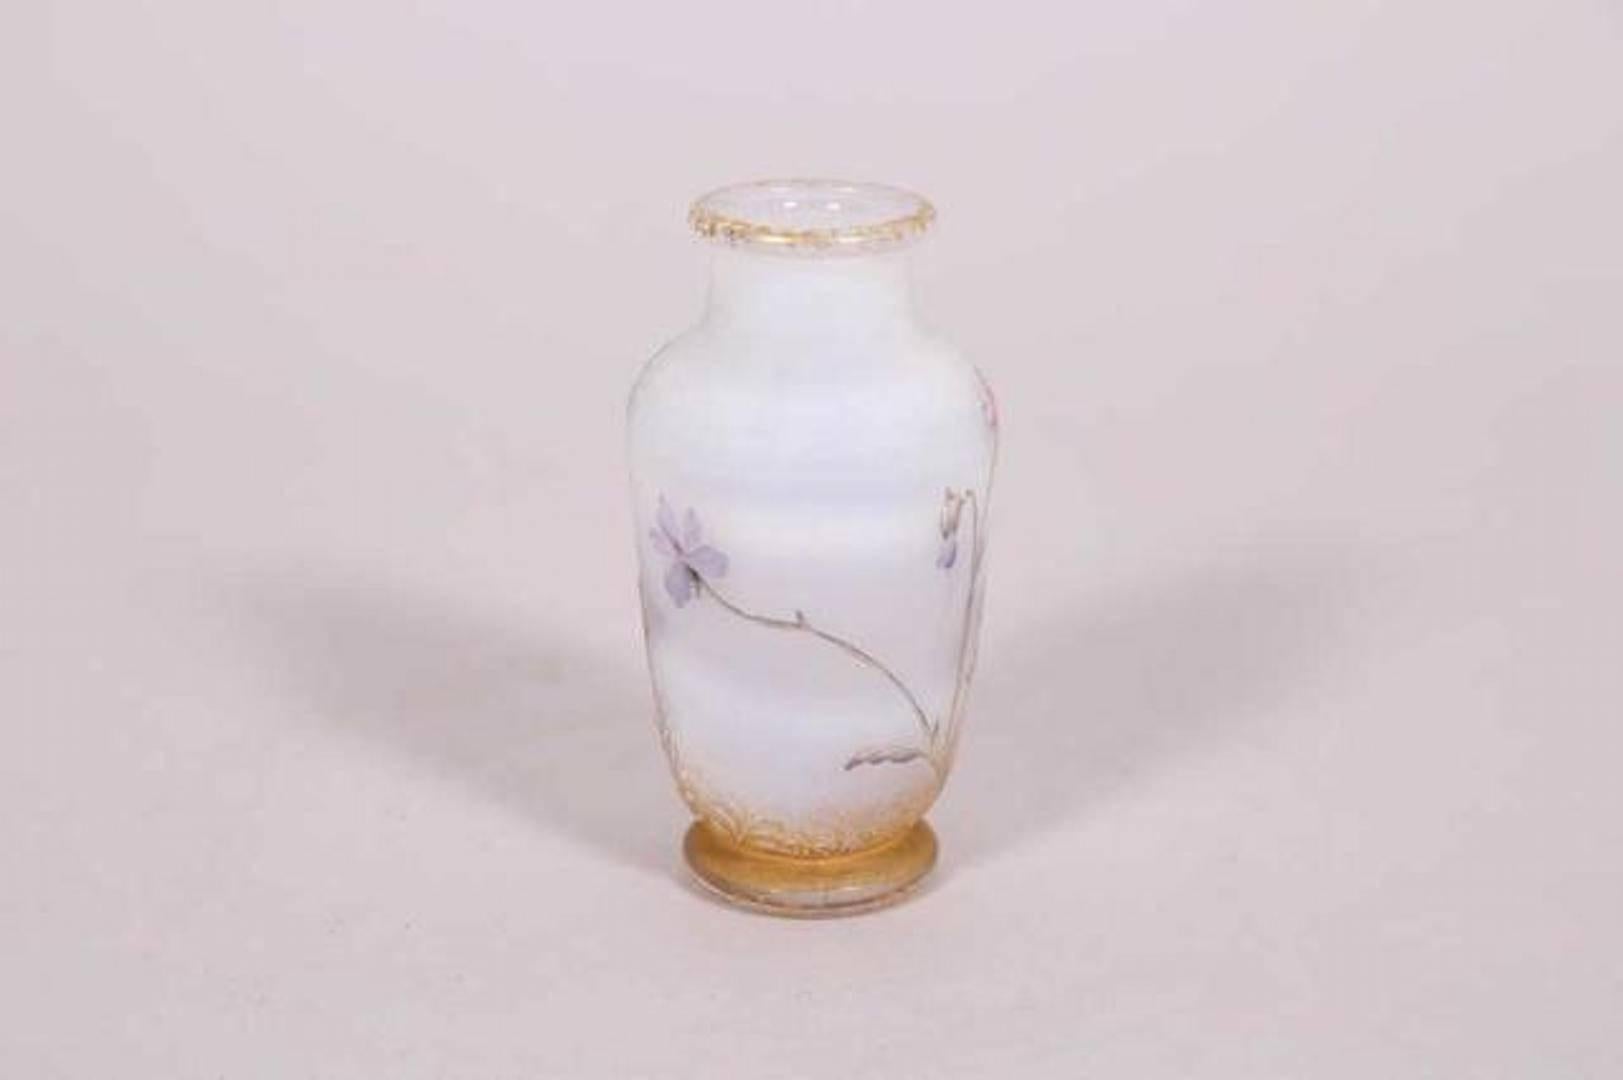 Small acid-etched multi-layered glass vase decorated with flowers, on iridescent opalescent background and acid etching of ferns
high 9 cm
circa 1095 
France, Nancy
continental US shipping from 70 euros collissimo by Post.